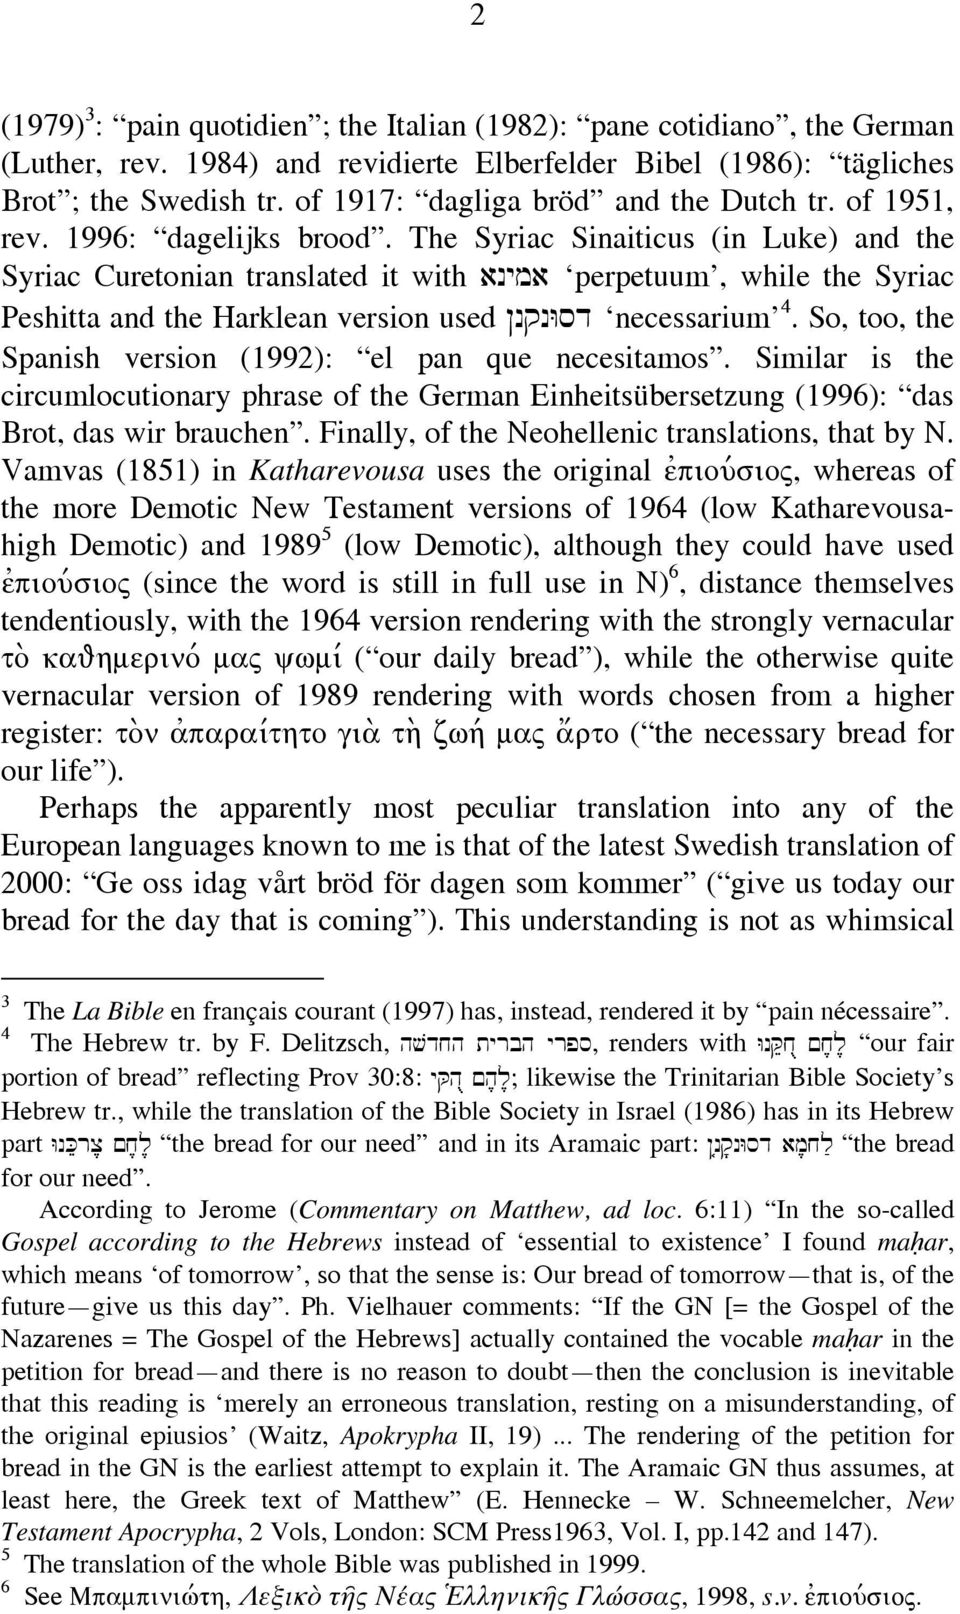 The Syriac Sinaiticus (in Luke) and the Syriac Curetonian translated it with anyma perpetuum, while the Syriac Peshitta and the Harklean version used nqnwsd necessarium 4.